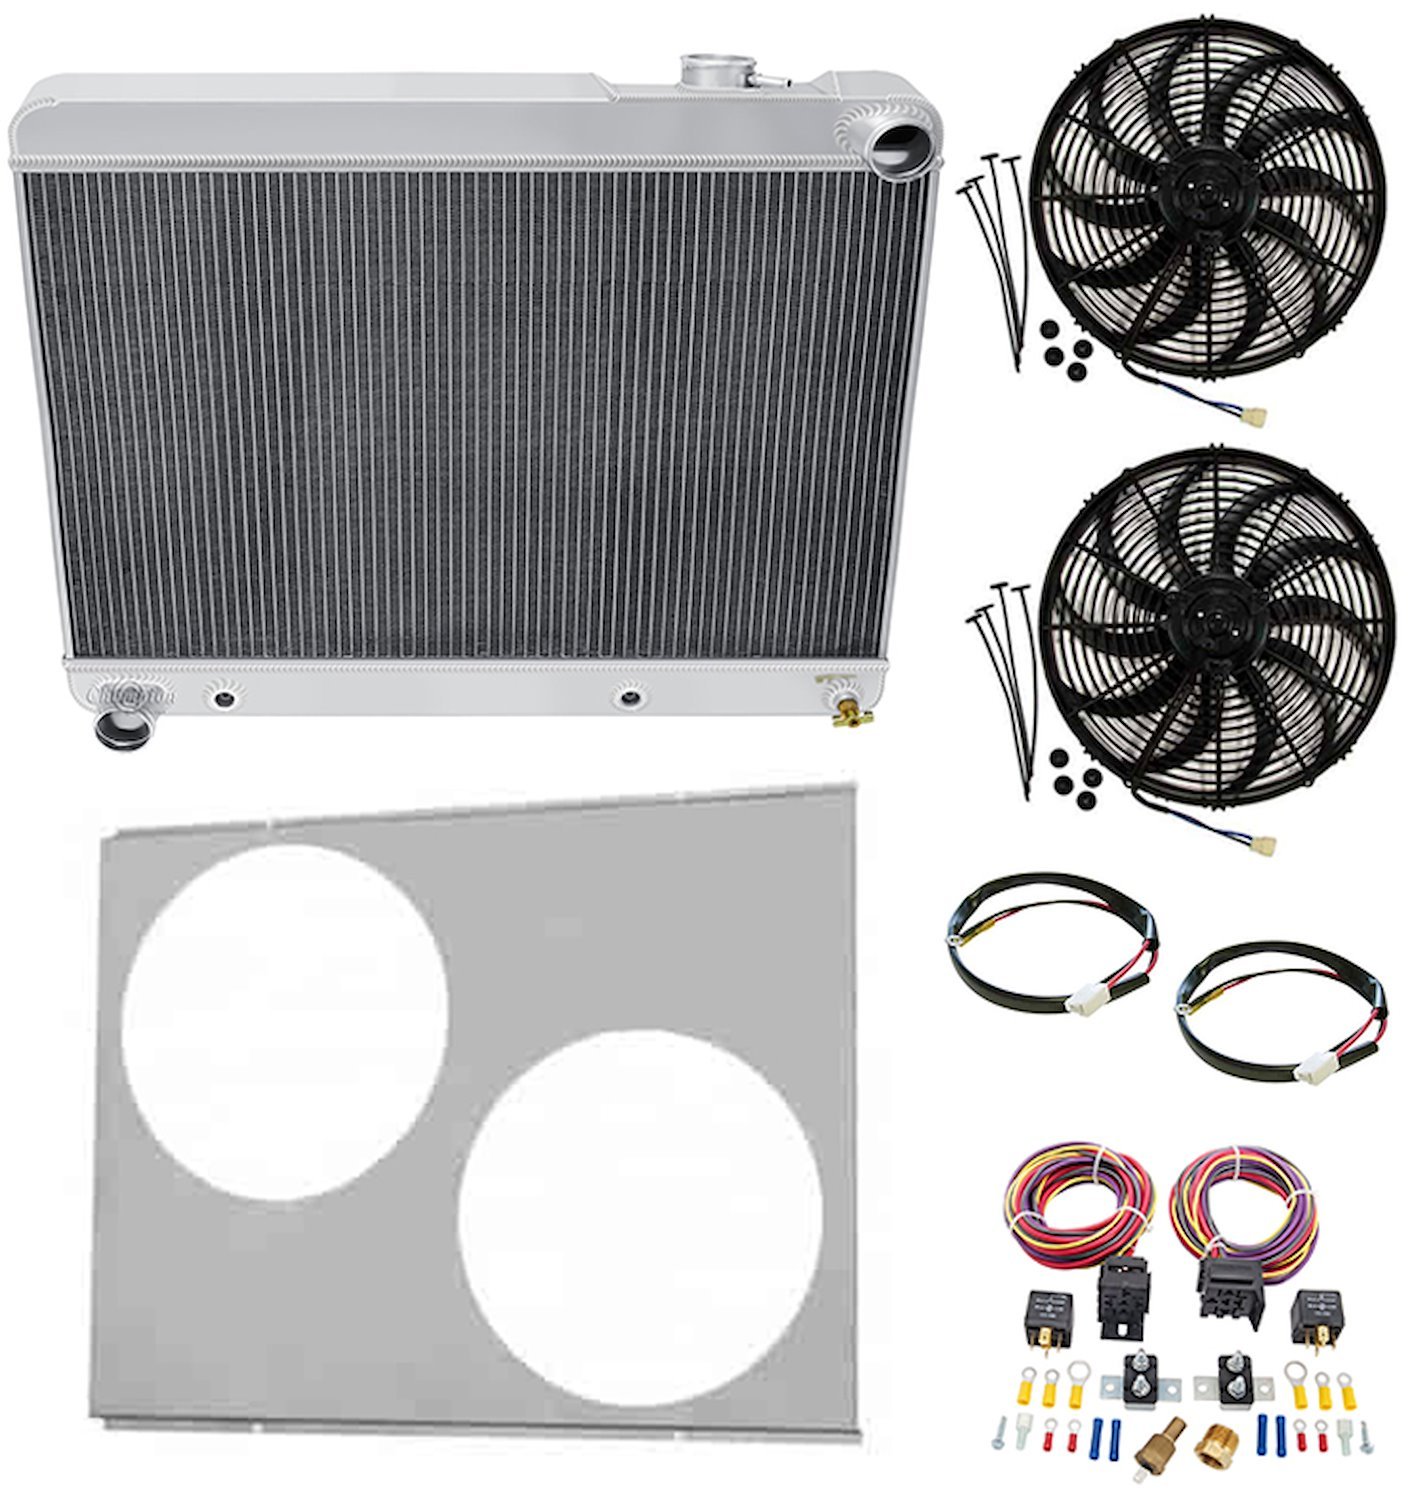 CC57BU All-Aluminum Radiator System Kit for 1957 Buick Special